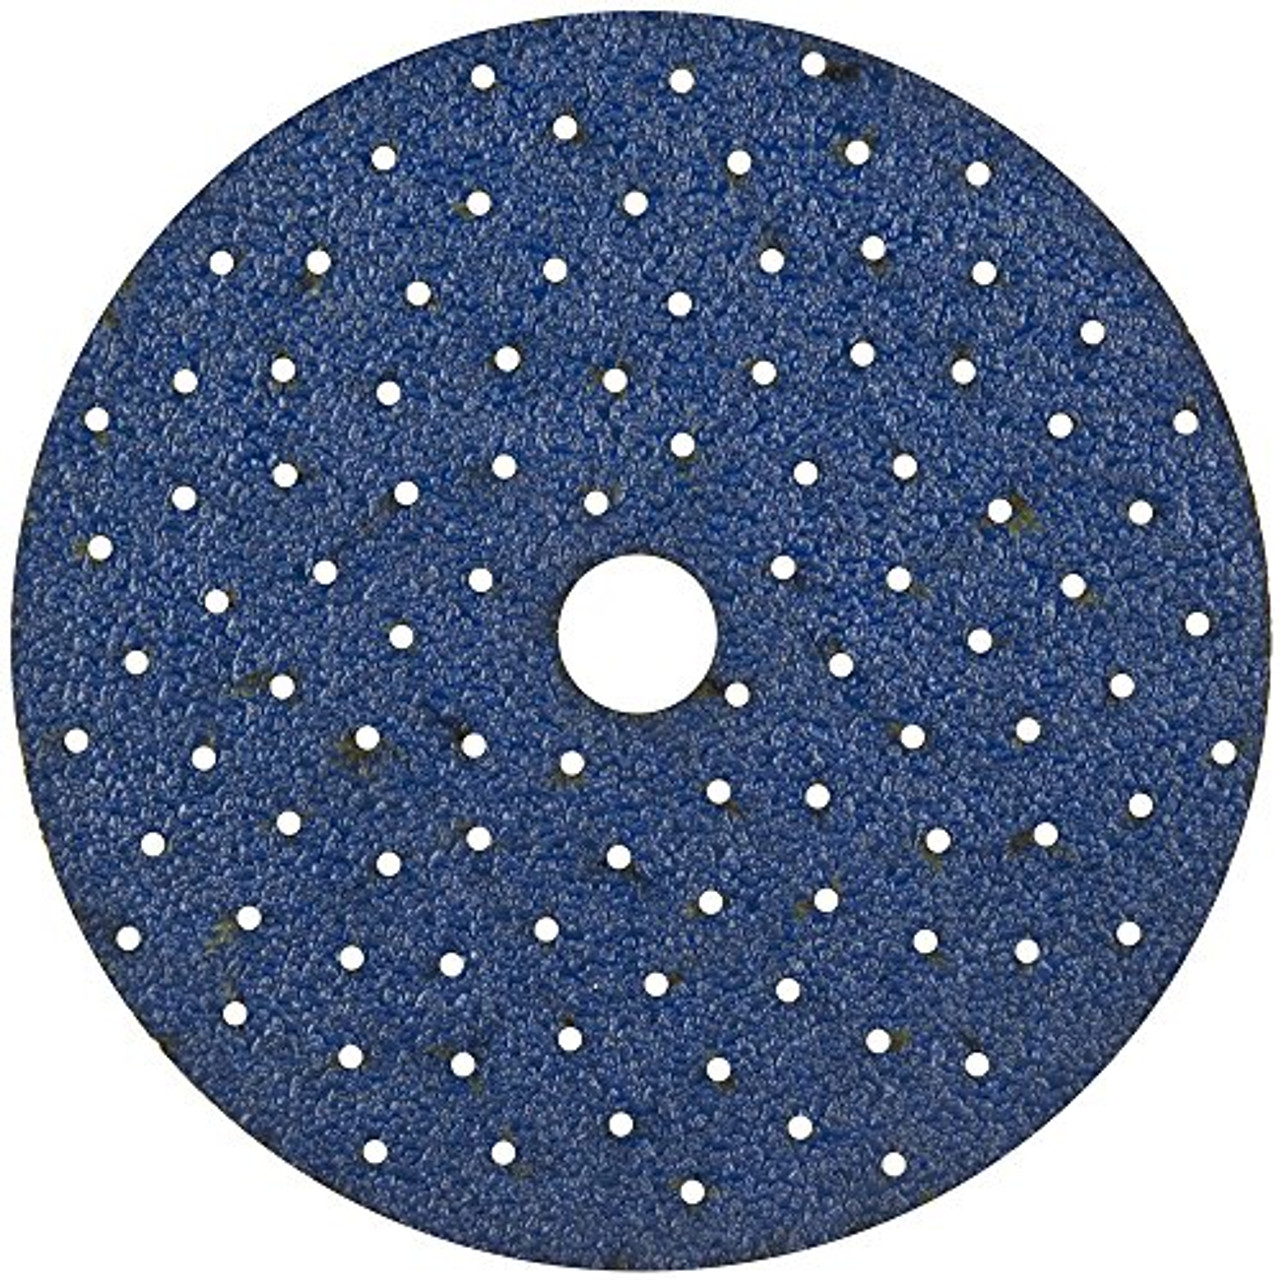 Norton (05484) 6" ProSand Multi-Air Hook-and-Sand Discs, Grit P220 (Pack of 50)